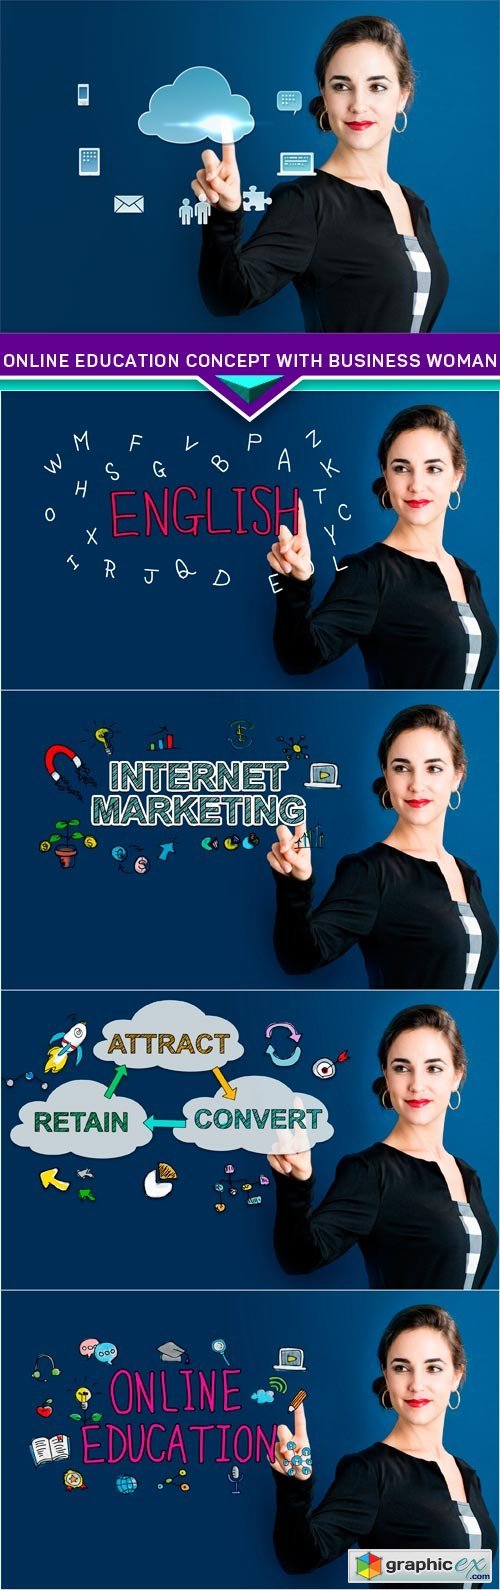 Online Education concept with business woman 5X JPEG